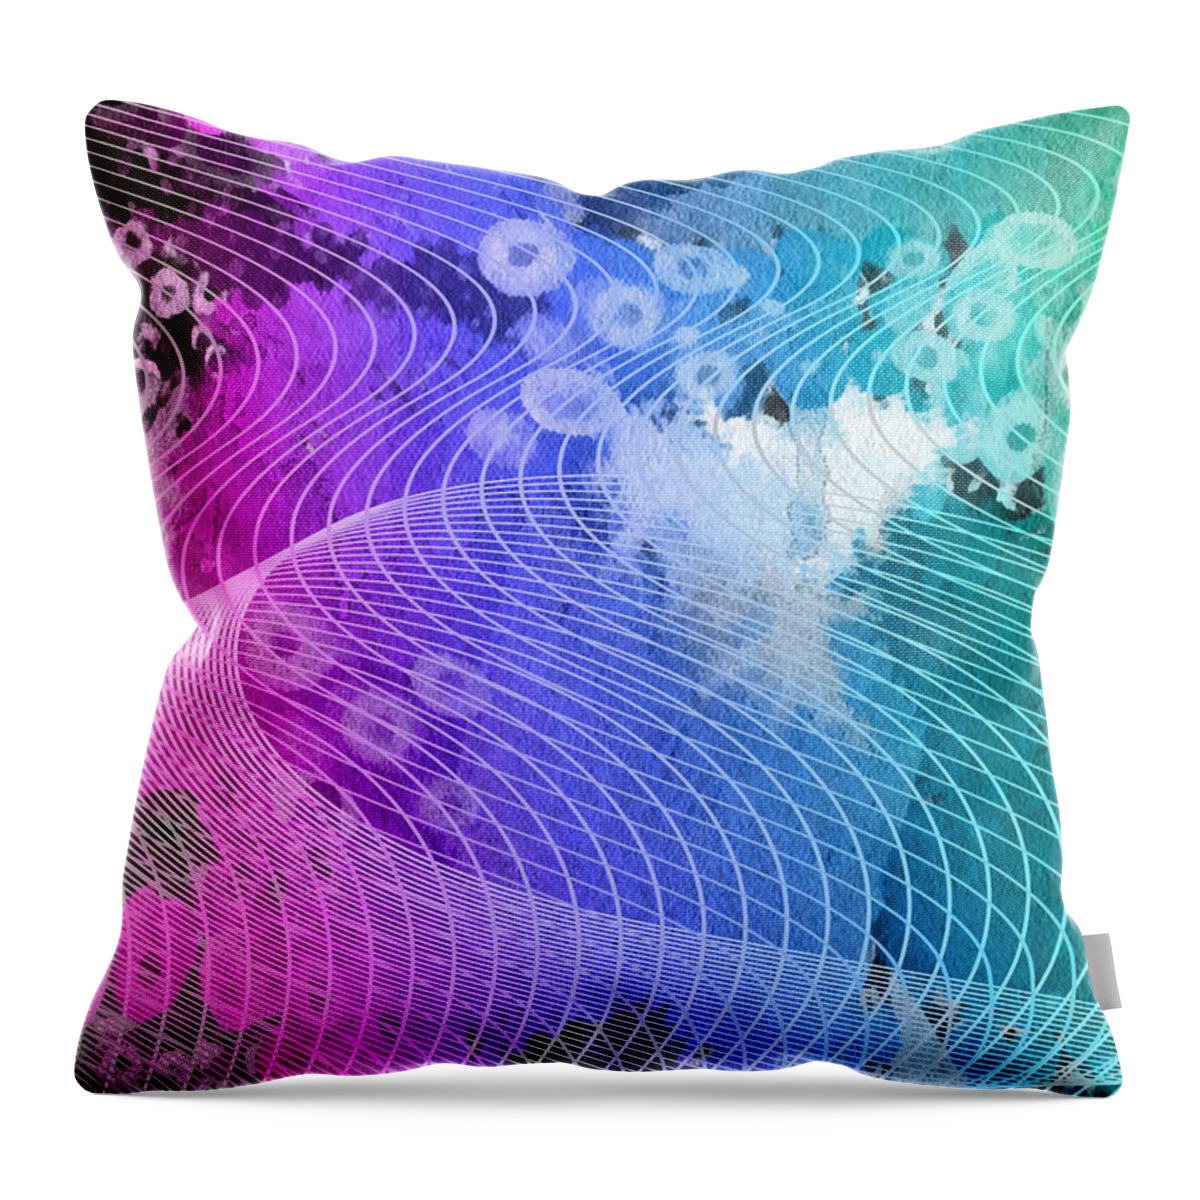  Abstract Throw Pillow featuring the mixed media Magnification 6 by Angelina Tamez